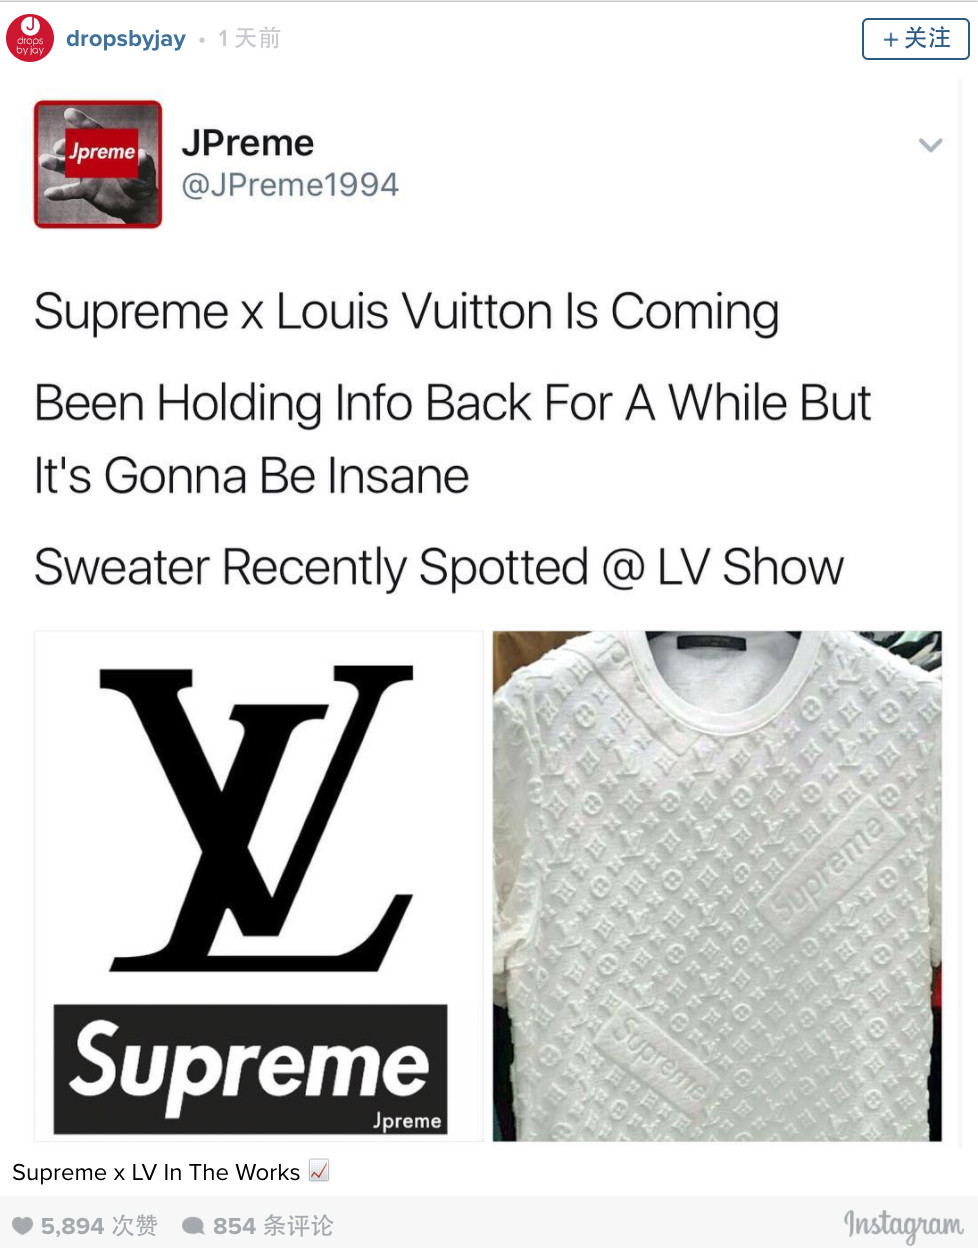 DropsByJay on X: Supreme x Louis Vuitton Is Coming Been Holding Info Back  For A While But It's Gonna Be Insane Sweater Recently Spotted @ LV Show   / X